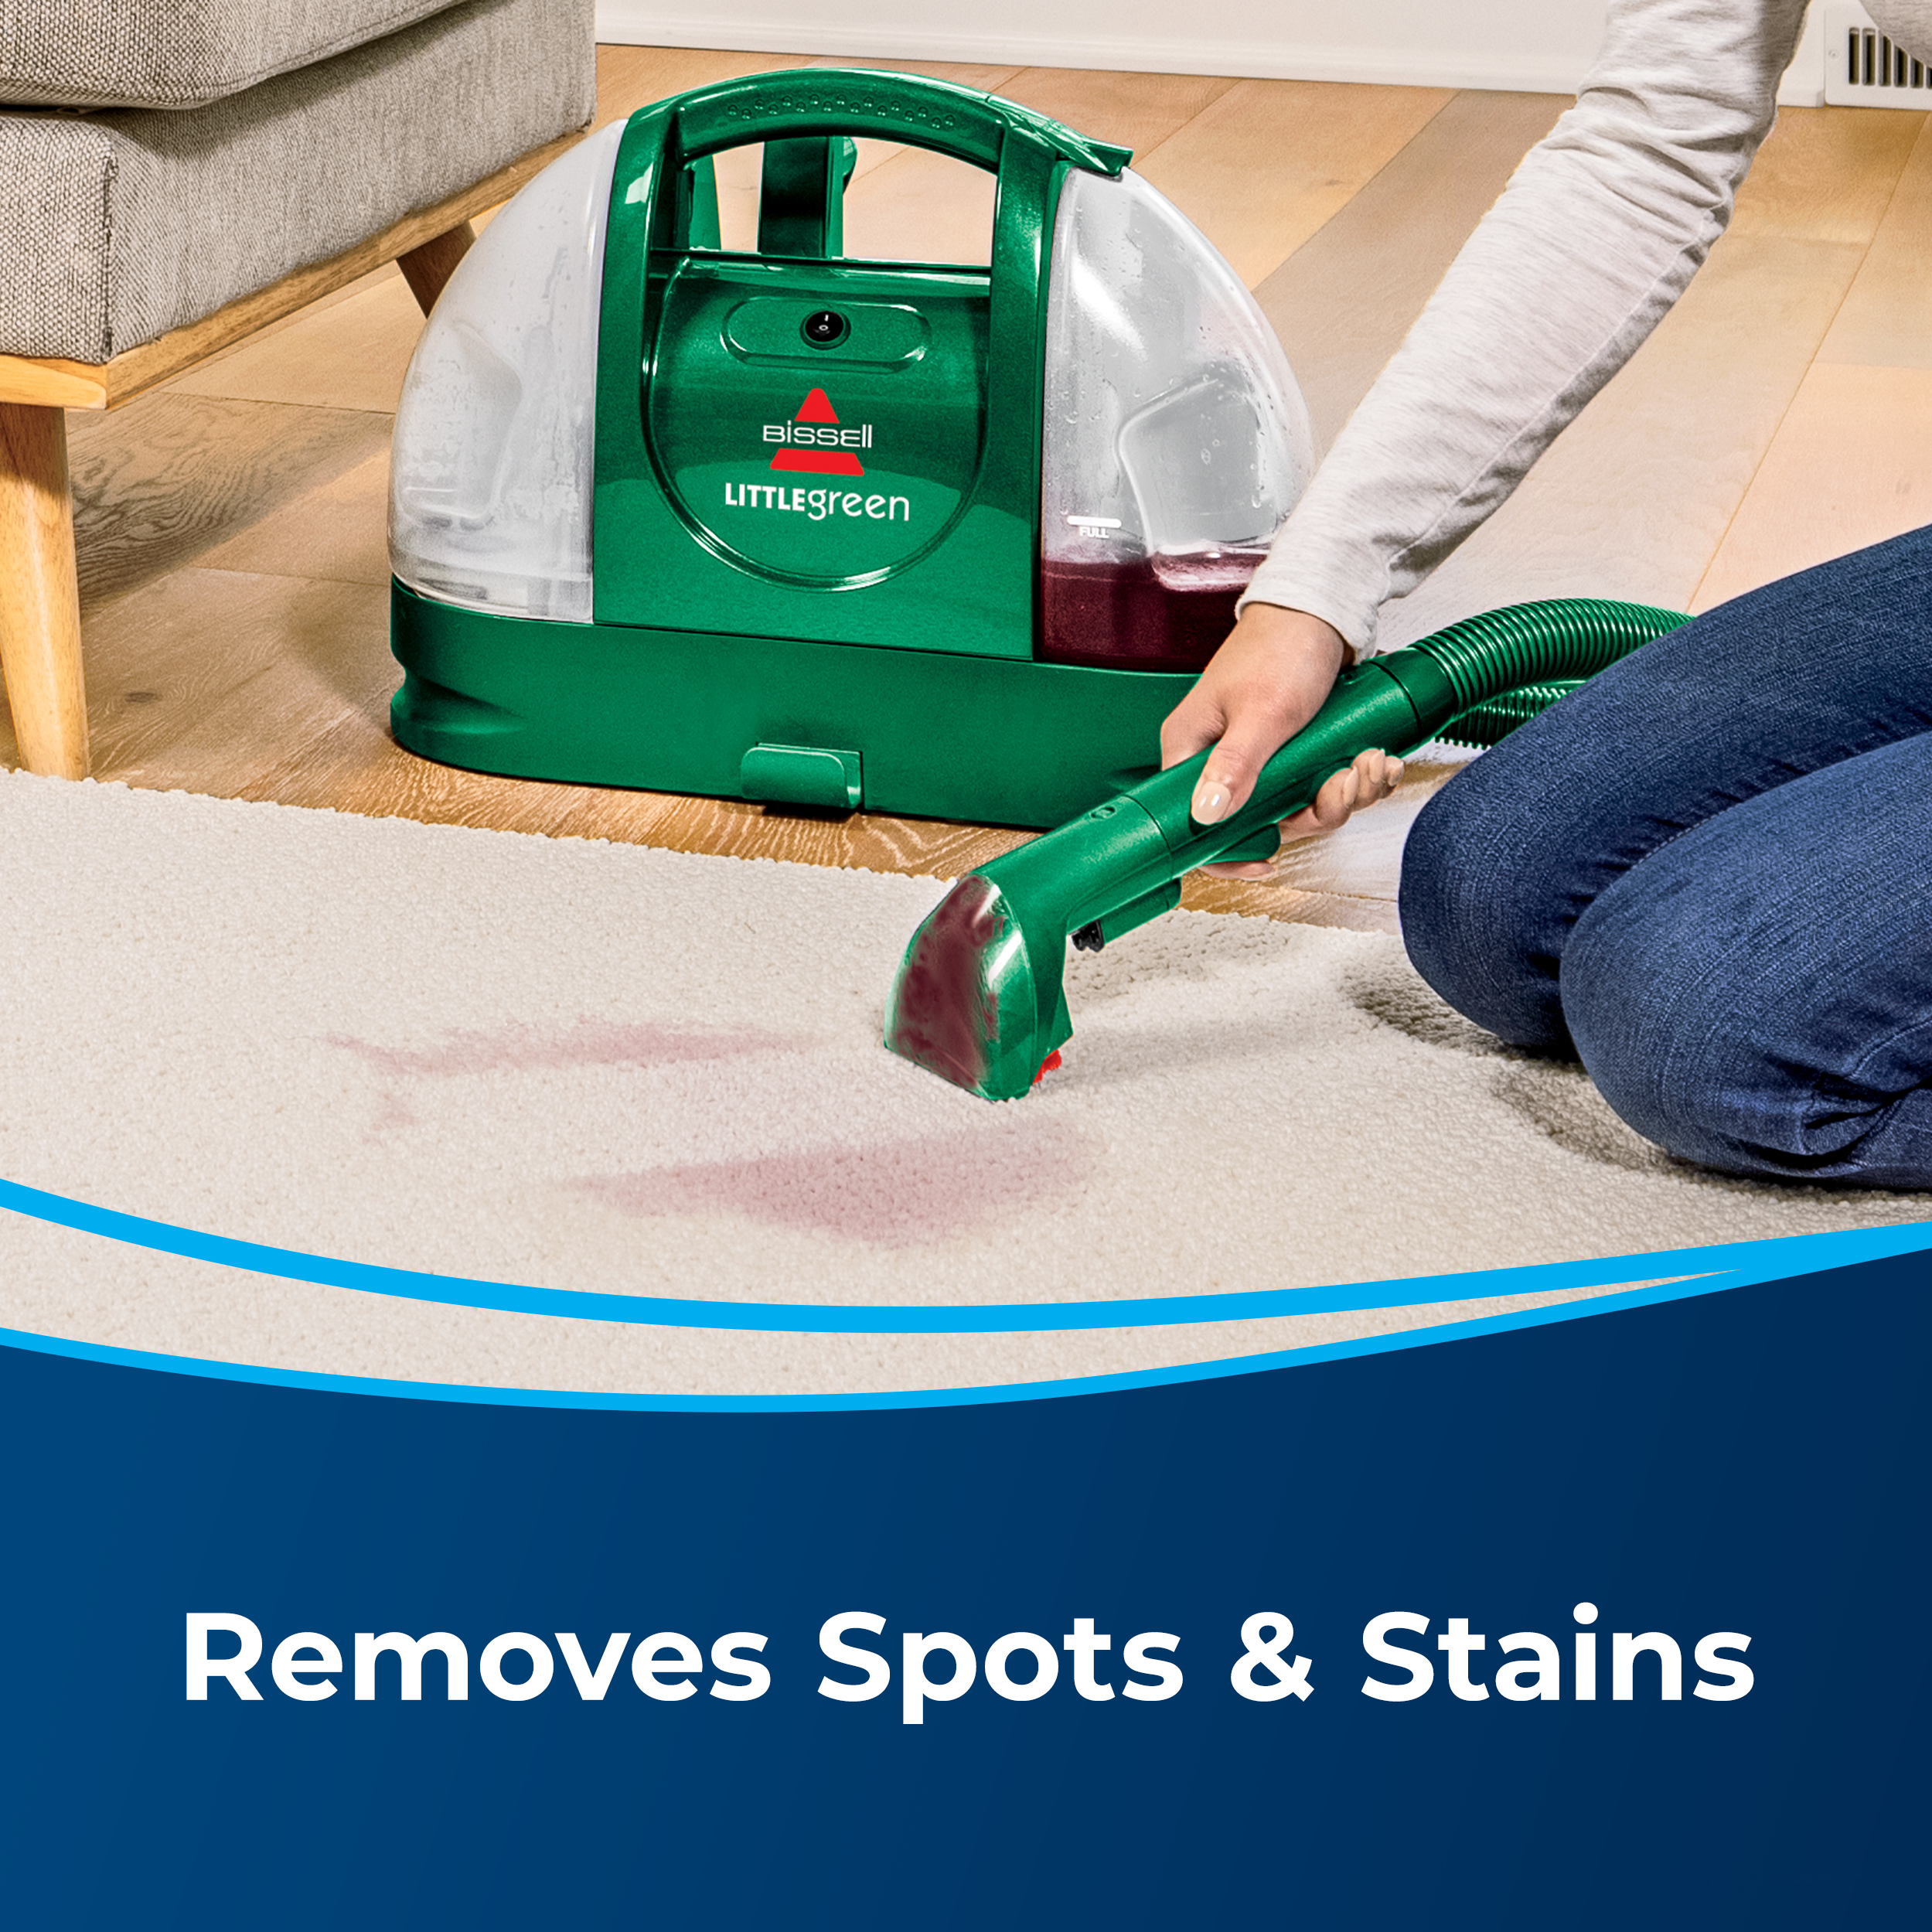 BISSELL Little Green Portable Spot and Stain Cleaner, 1400M - image 9 of 11